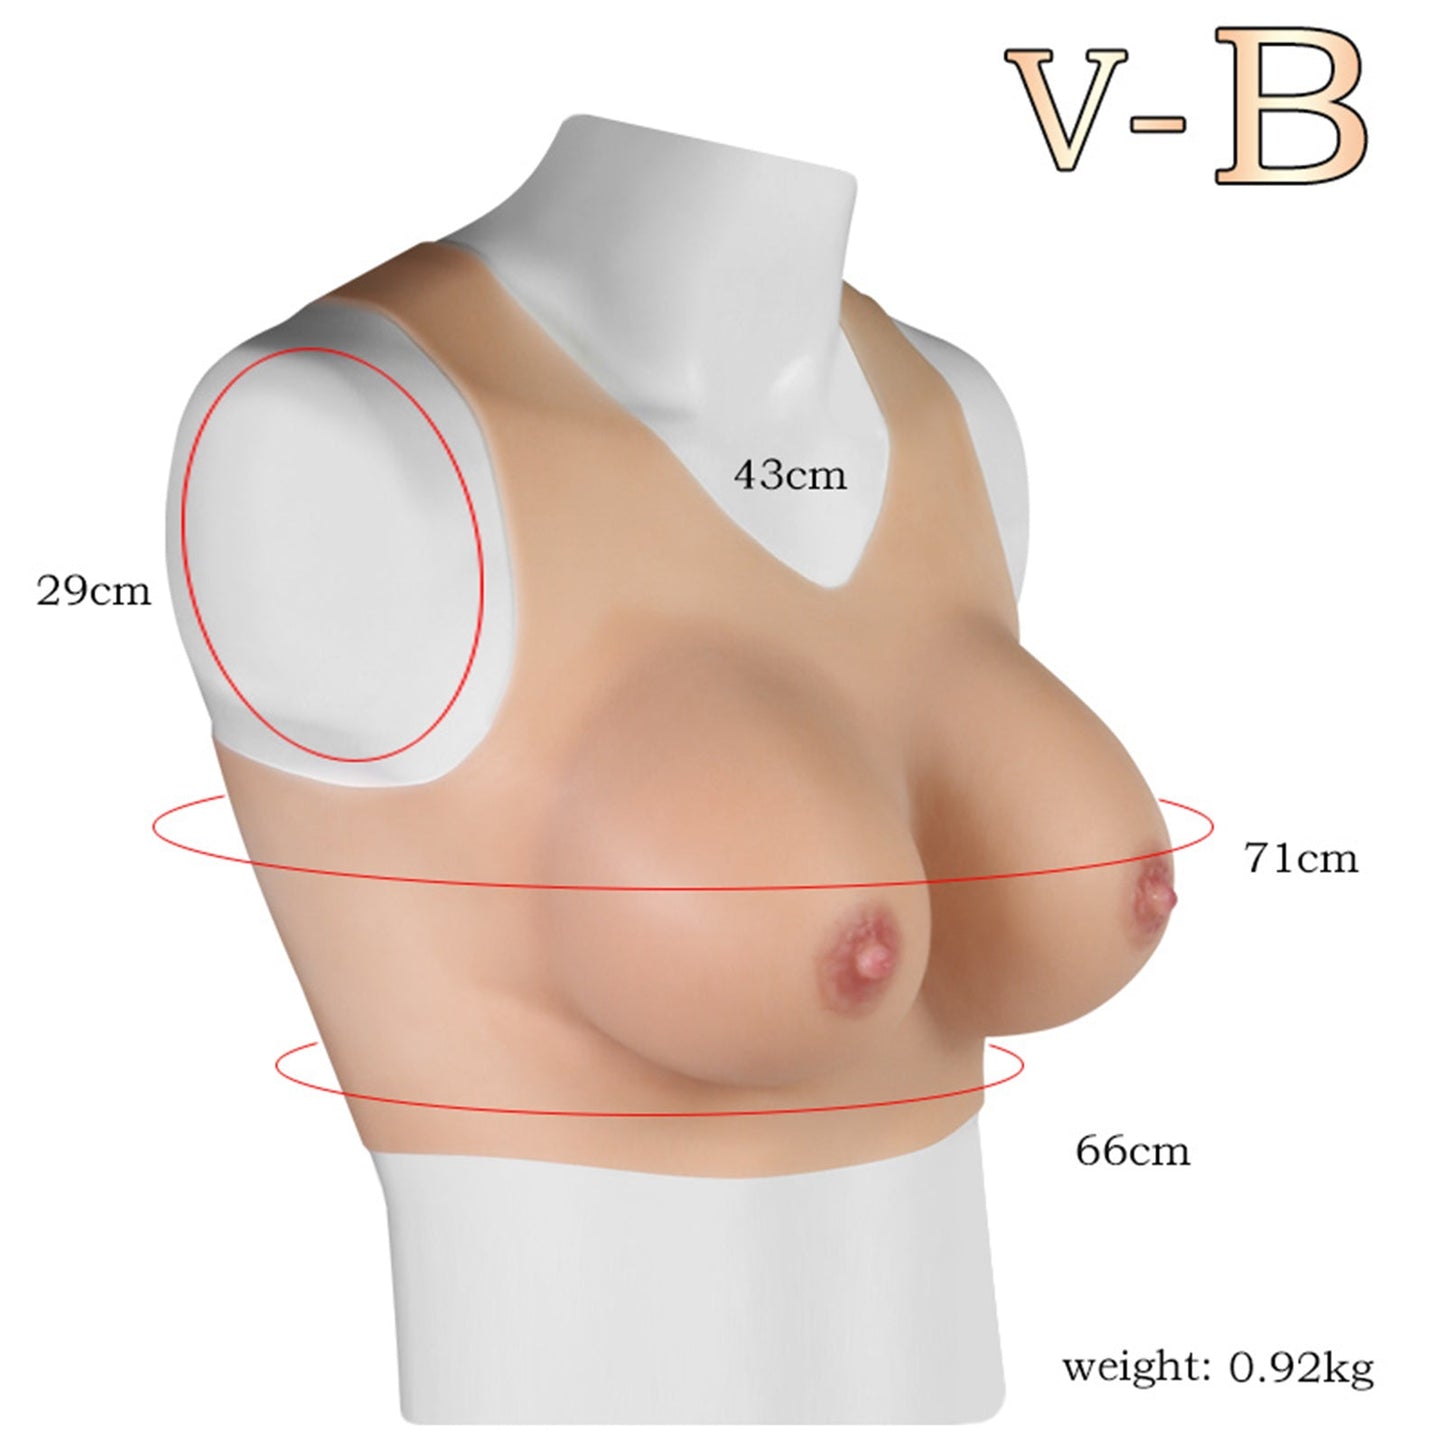 V Neck BF Cup Silicone Breast Forms Faux Seins pour Crossdresser Drag Queen